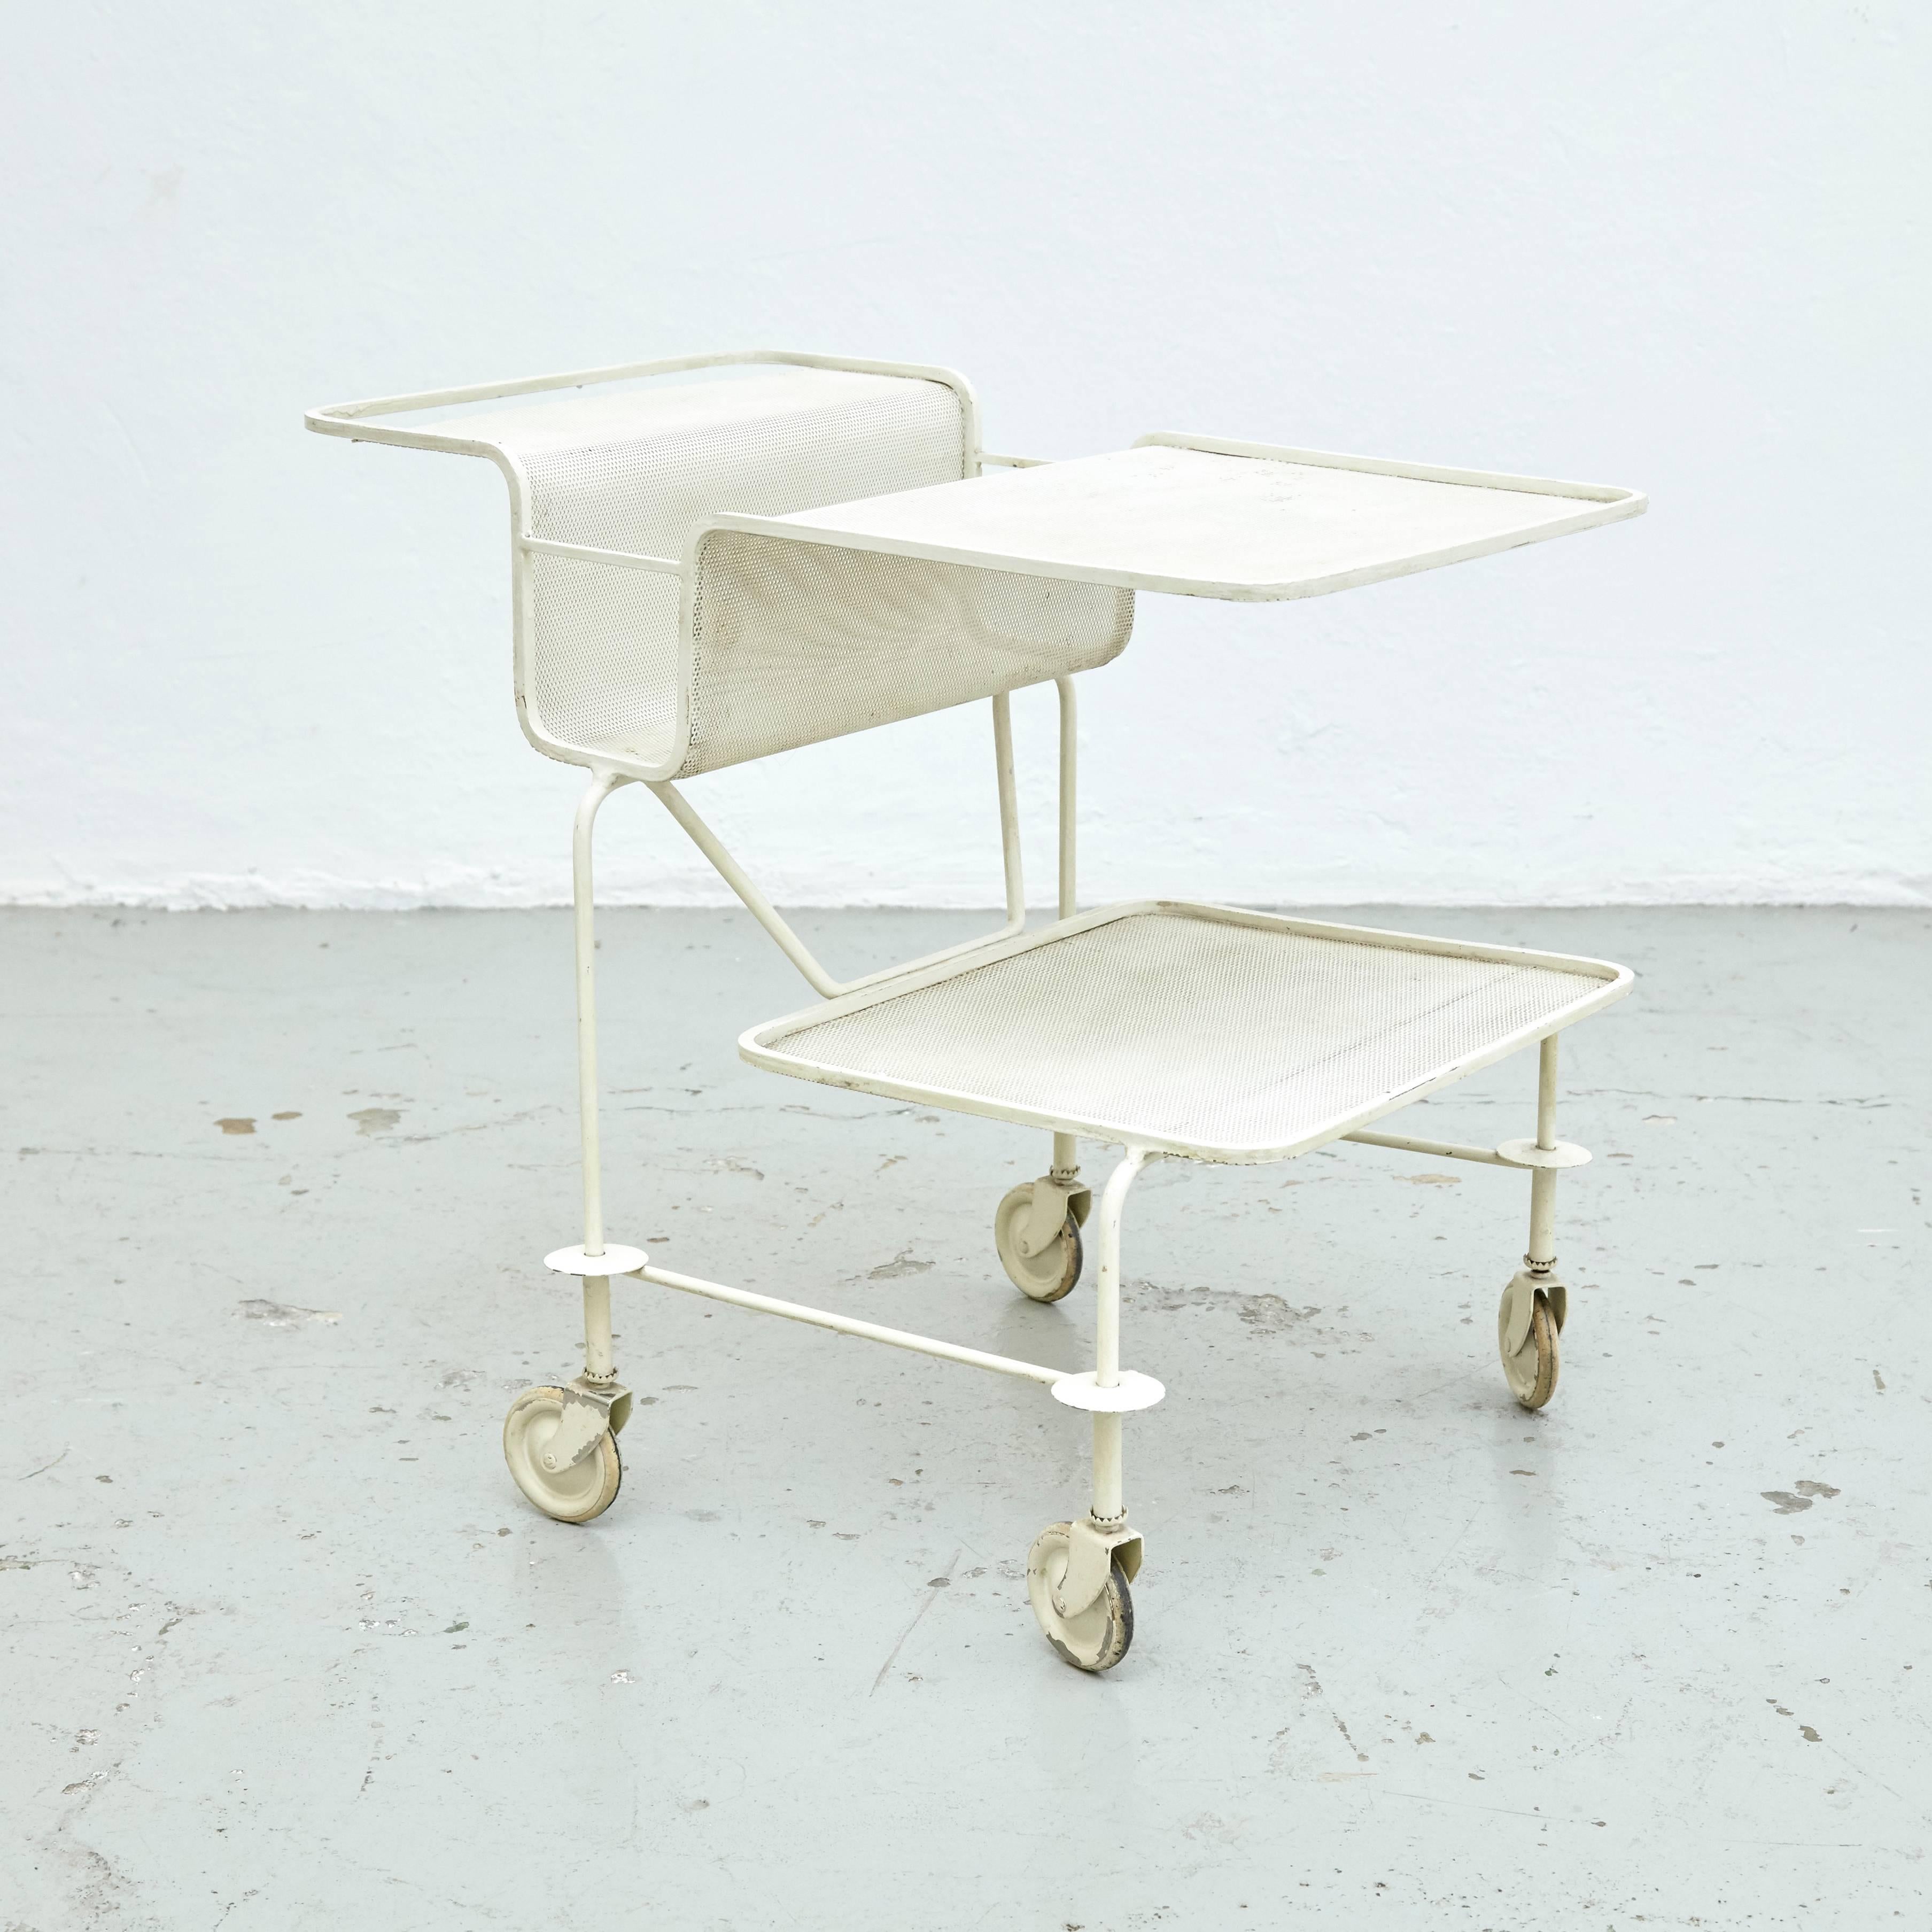 Trolley designed by Mathieu Matégot. 
Manufactured by Ateliers Matégot (France), circa 1950. 

Folded, perforated metal lacquered in white. 

In original condition, with minor wear consistent with age and use, preserving a beautiful patina,